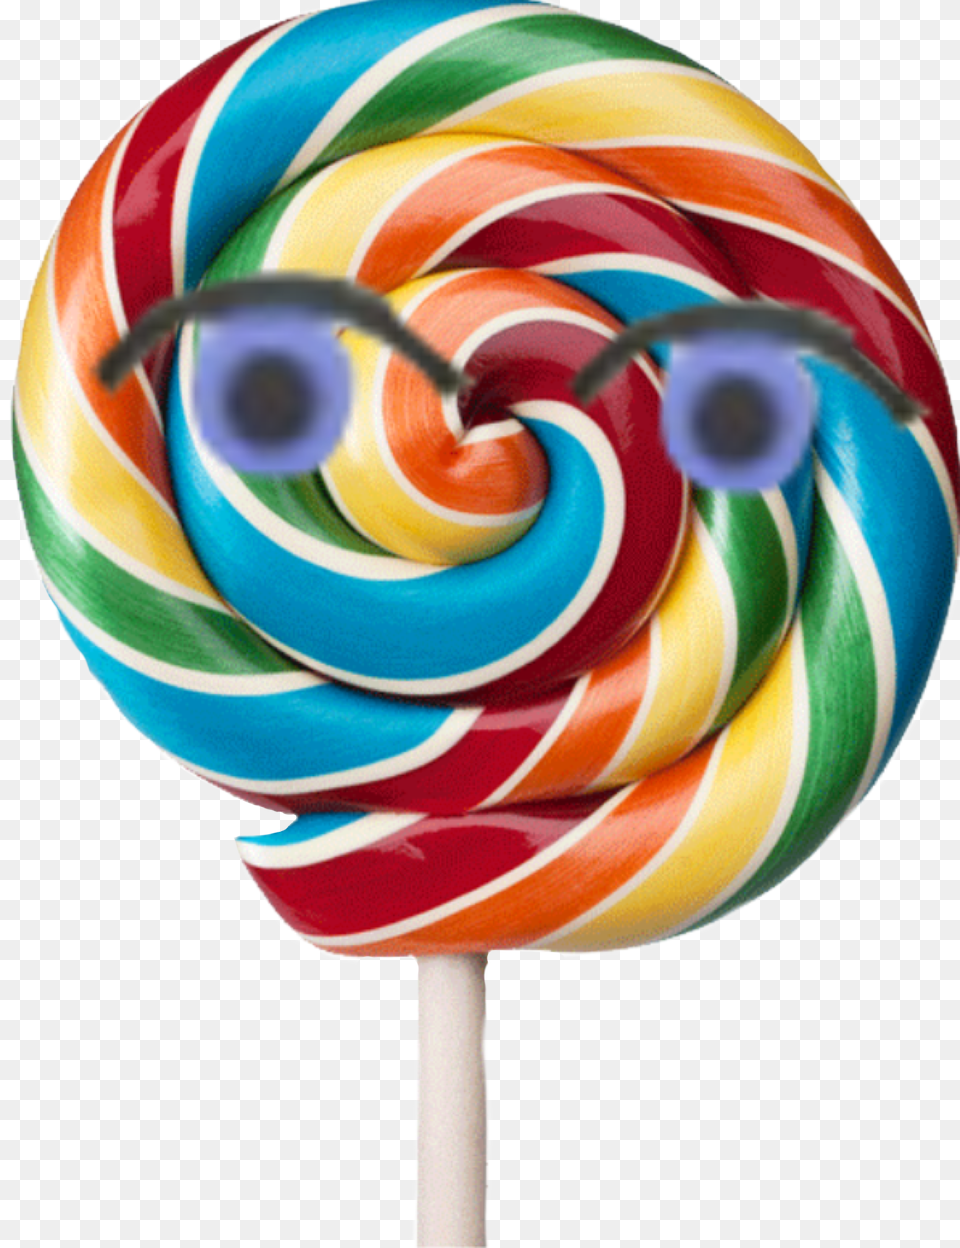 Candy, Food, Lollipop, Sweets Png Image